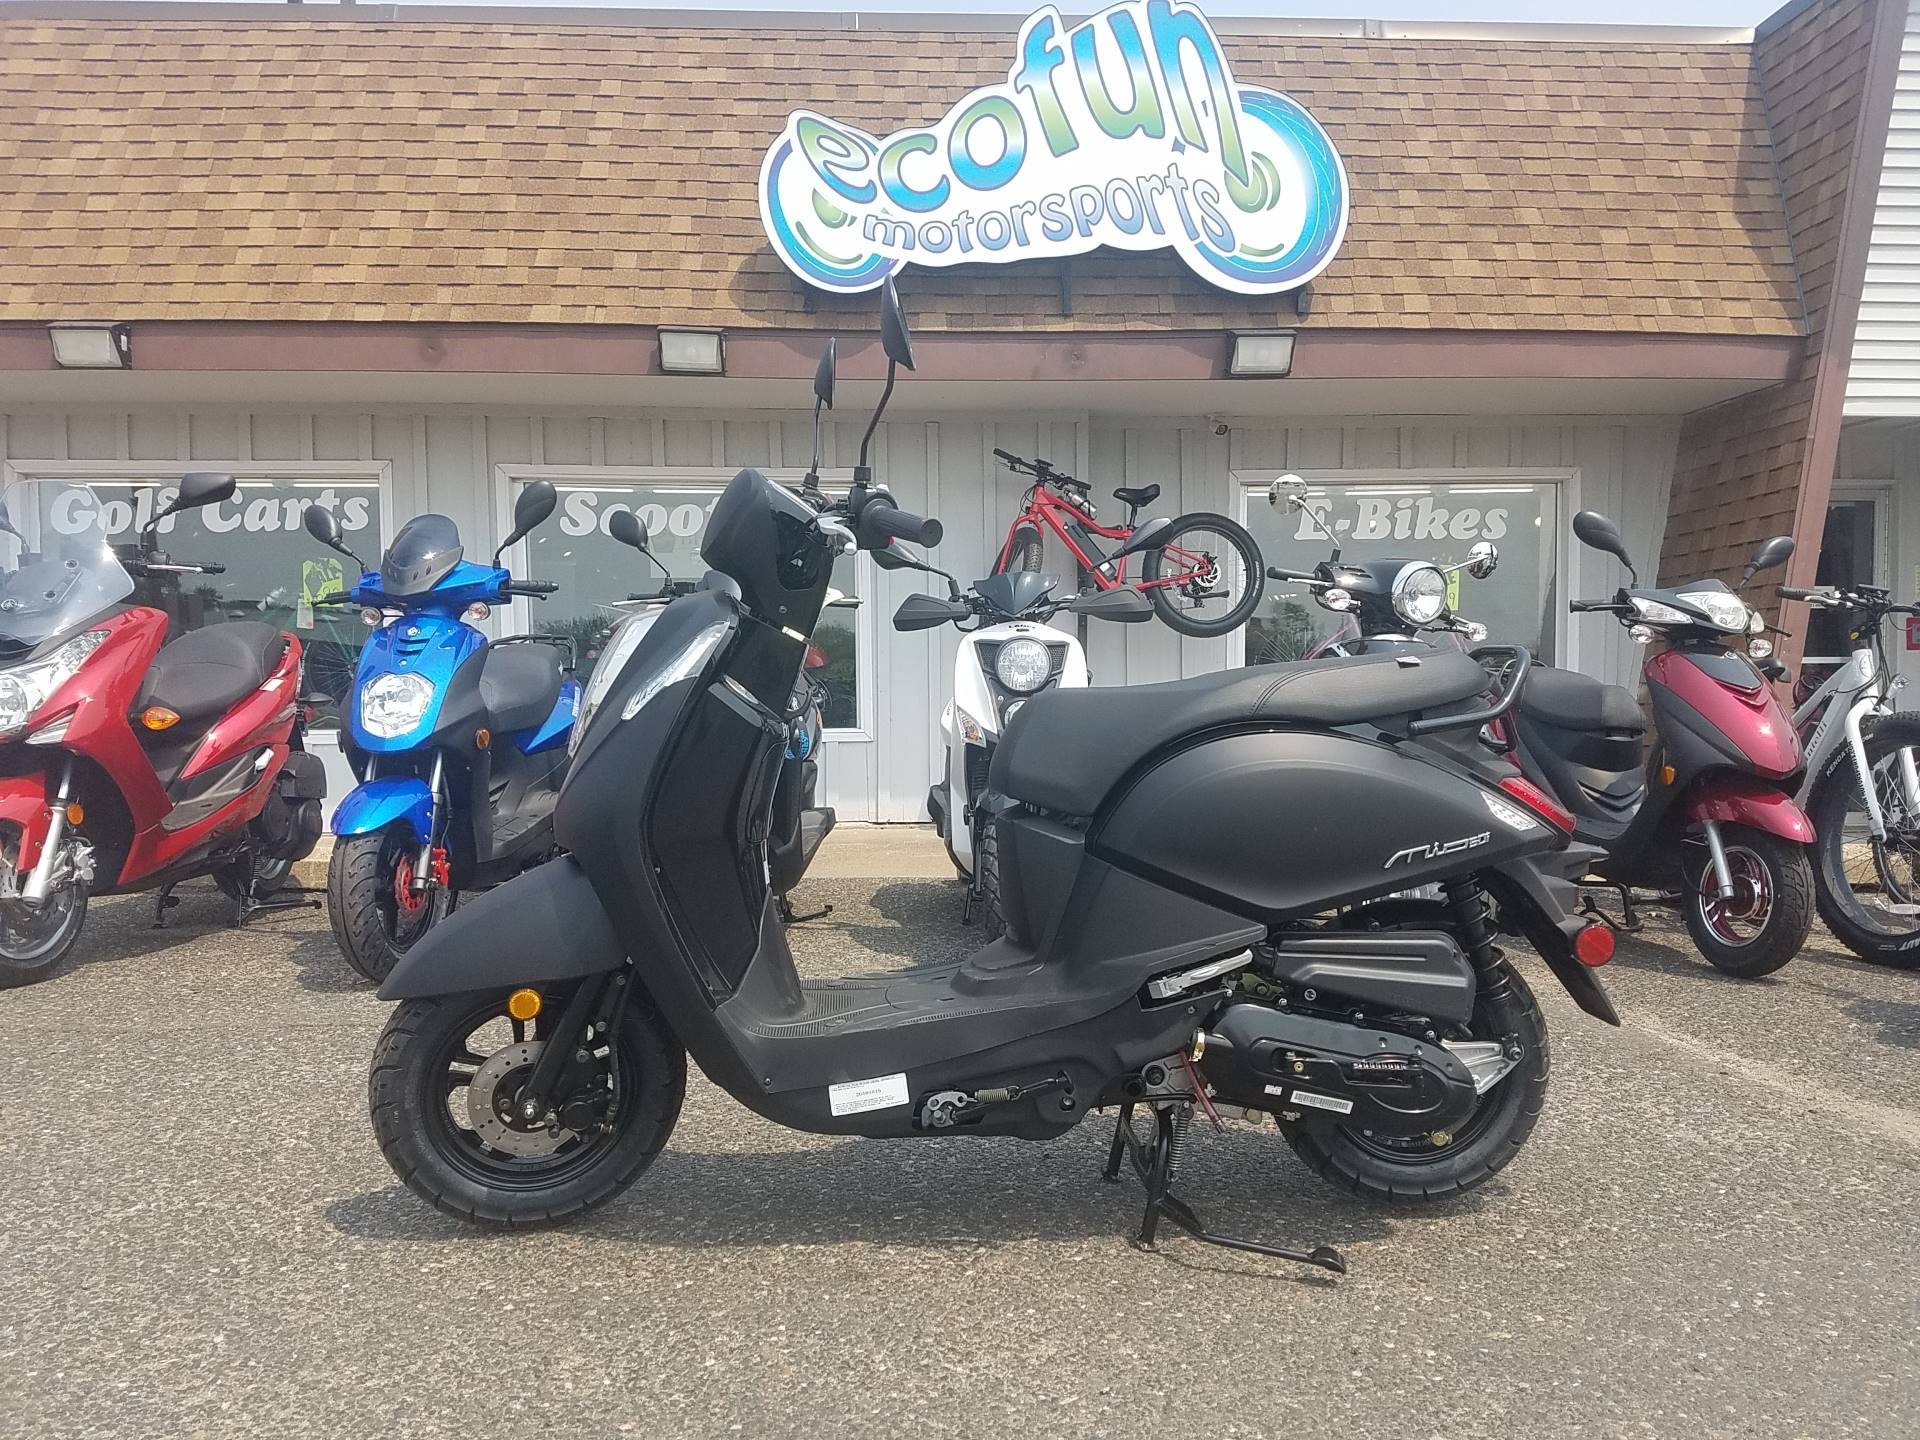 2022 SYM Mio 49cc Scooter in Forest Lake, Minnesota - Photo 3